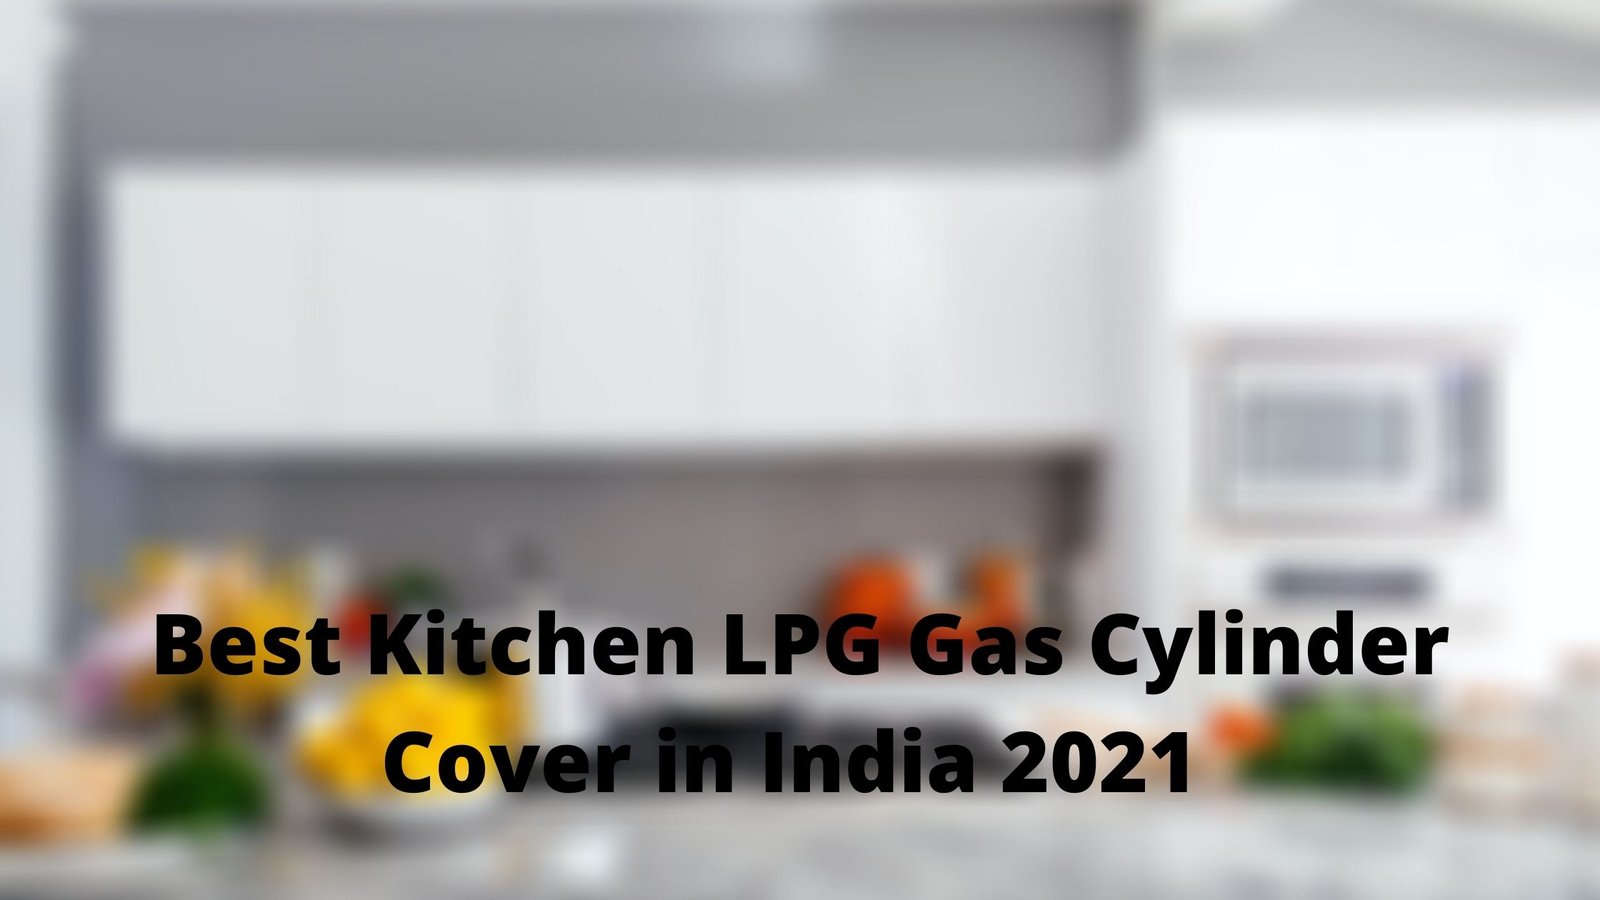 Top 7 Best Kitchen LPG Gas Cylinder Cover in India 2021